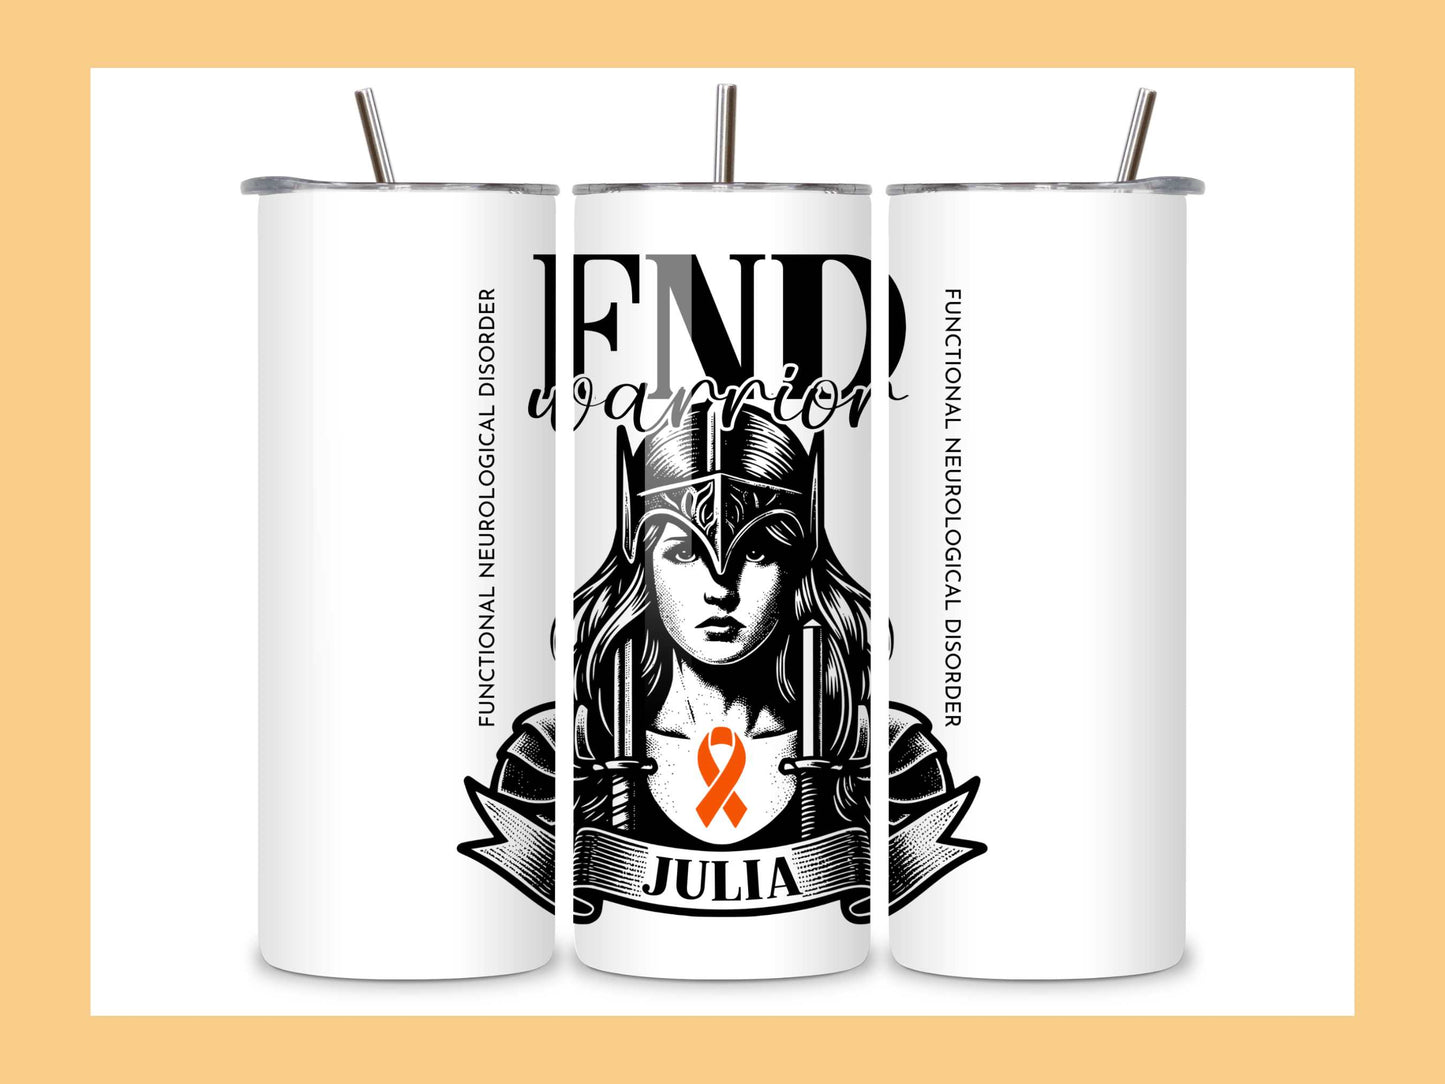 FND Warrior Personalised Mug - A Heartfelt Christmas, Mother's Day, Birthday Gift for Mum, Daughter, Sister, Nan, Auntie & Friends, Celebrating Strength and Awareness